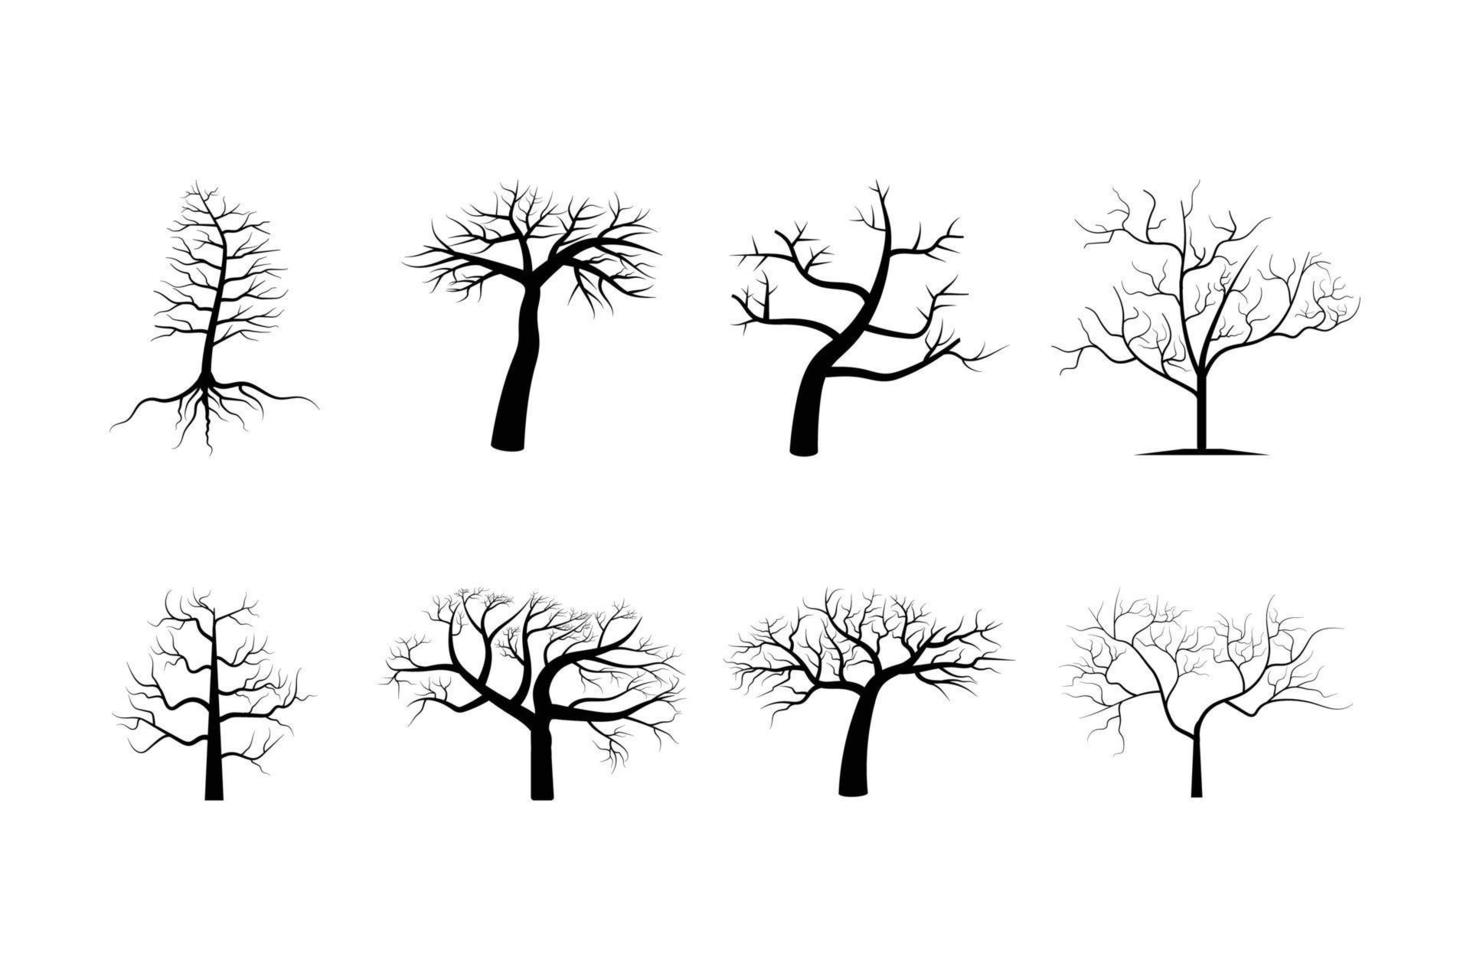 Dead tree silhouettes vector. Dying black scary Spooky trees forest illustration image vector